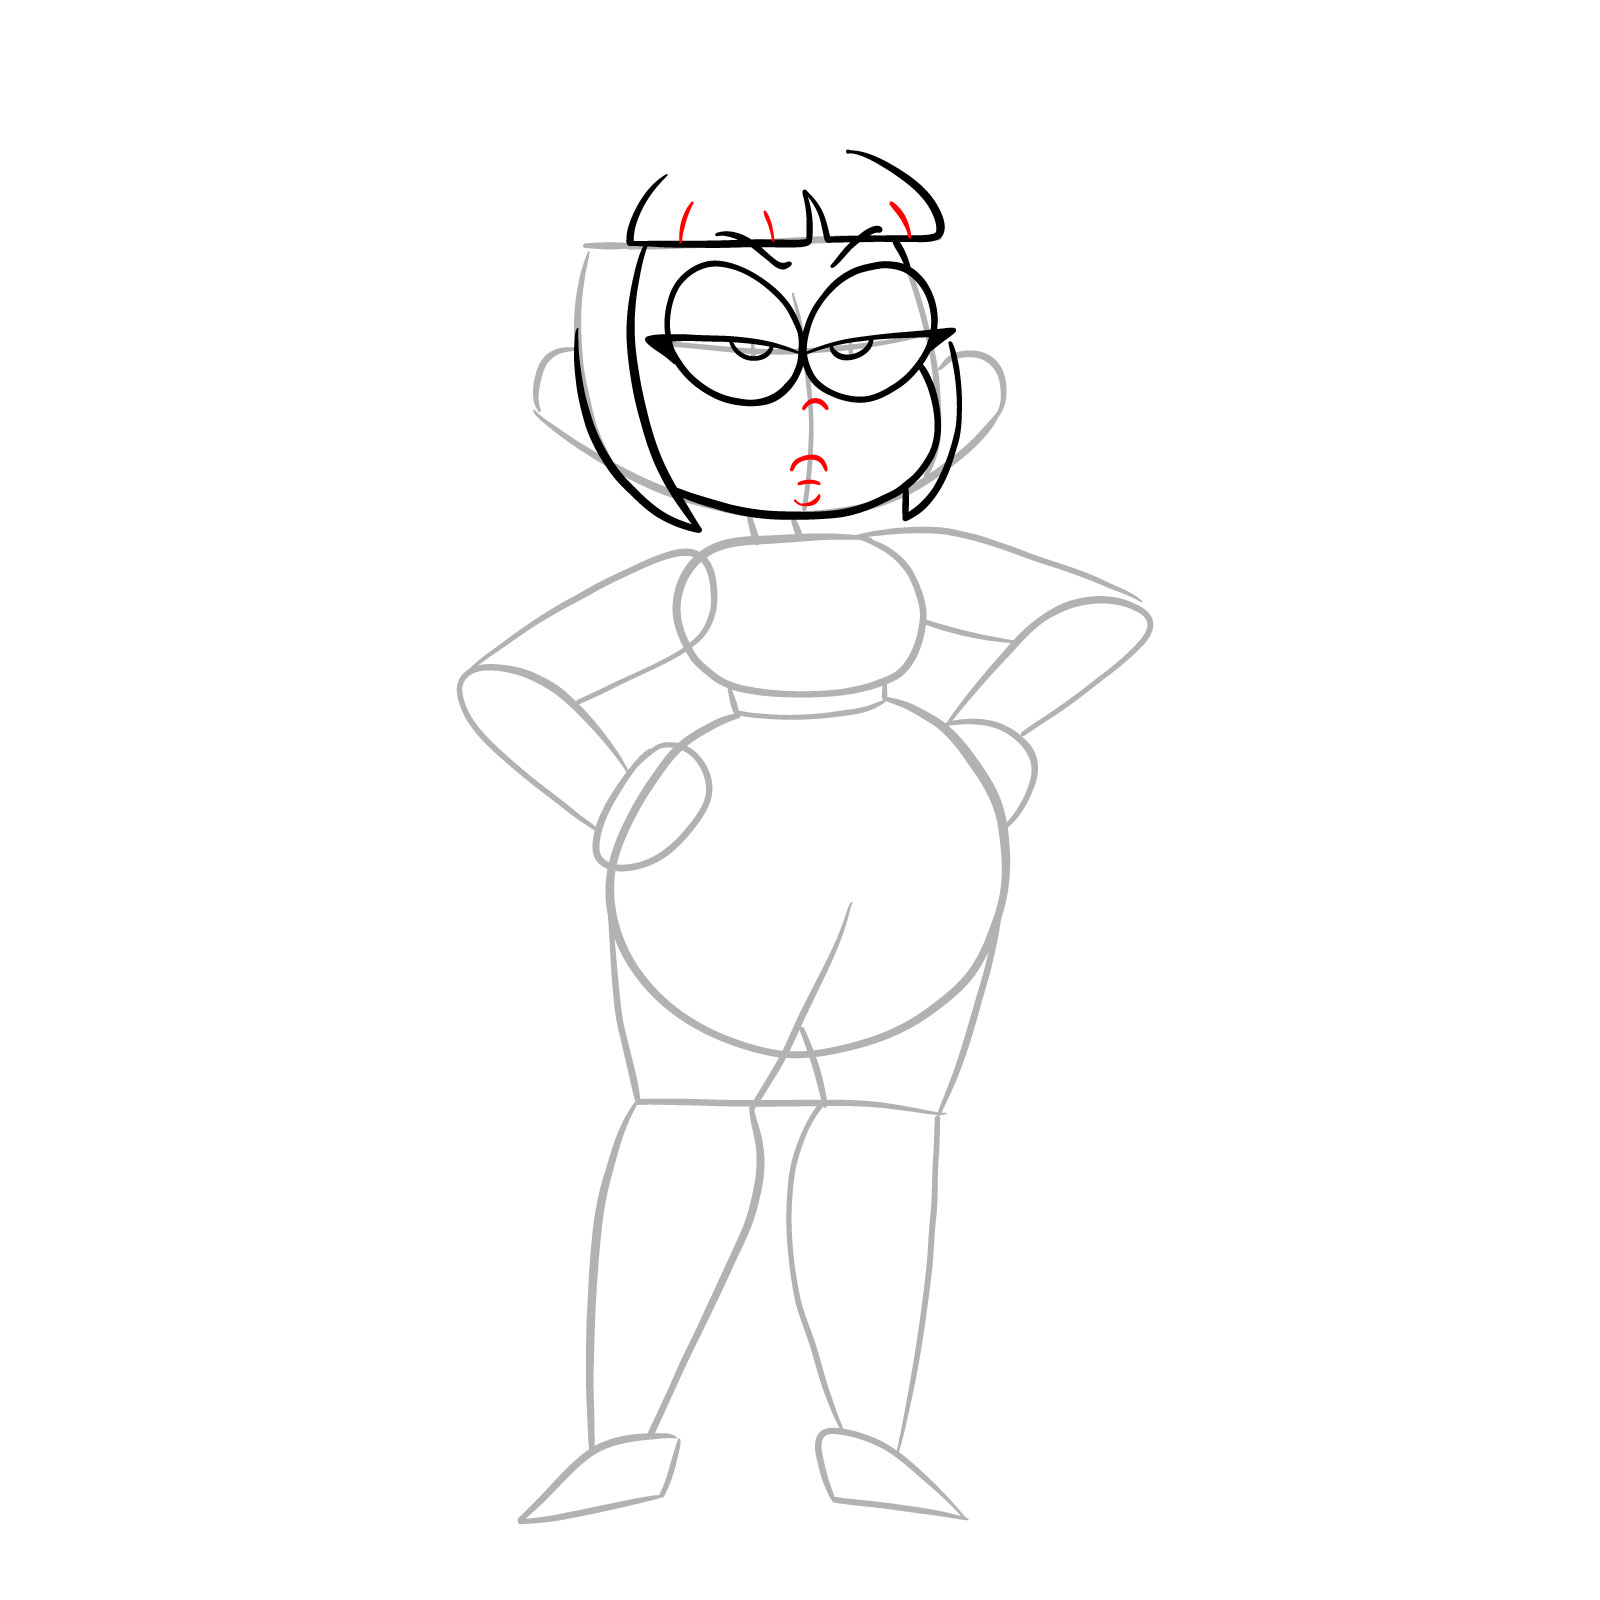 How to draw Human Shannon from OK K.O.! - step 10